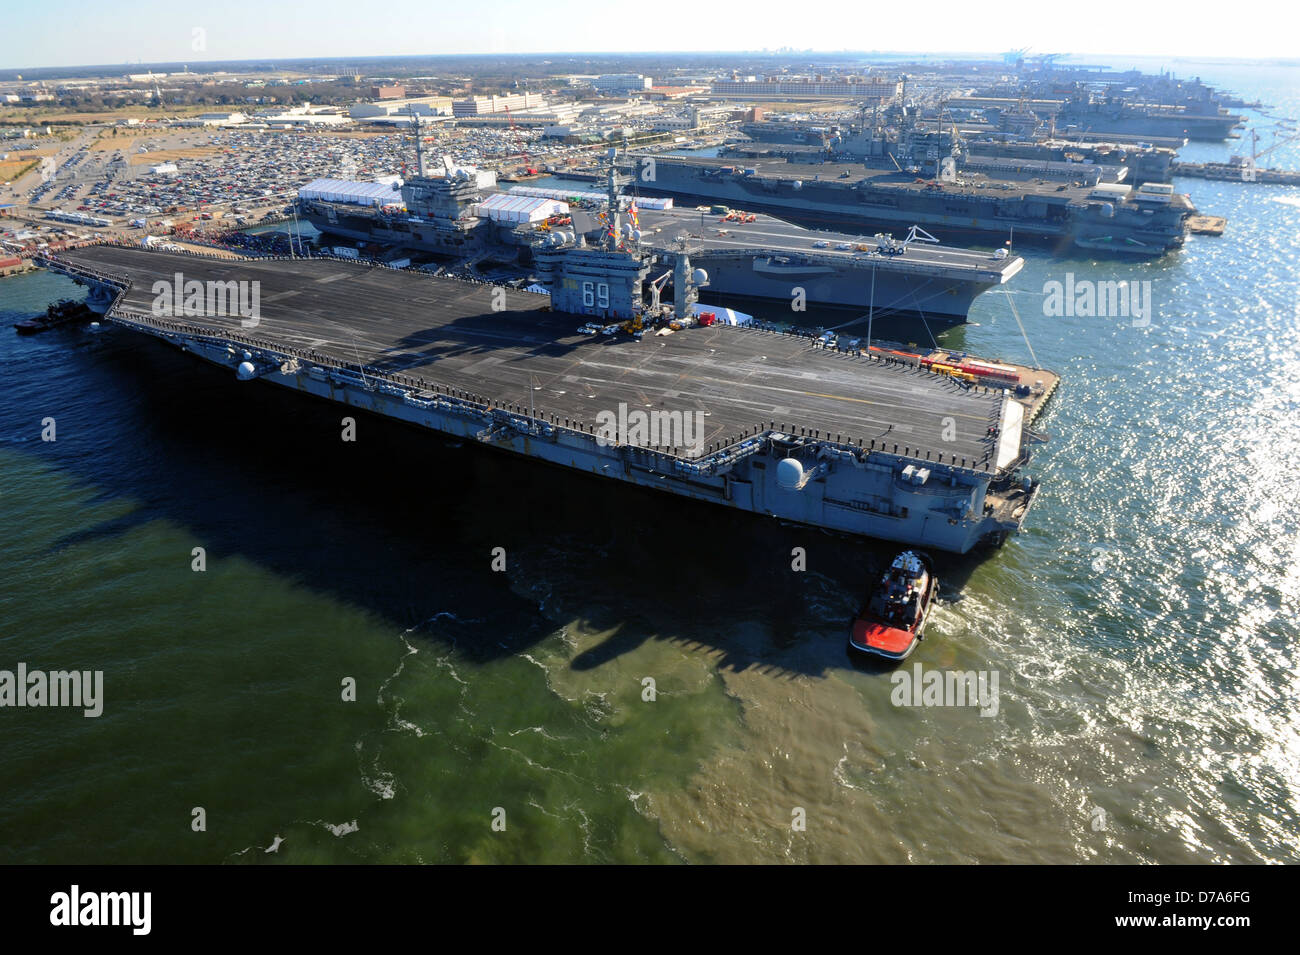 US Navy aircraft carrier USS Dwight D. Eisenhower moves into dock at Naval Station Norfolk after a six-month deployment to the U.S. 5th and 6th Fleet areas of responsibility in support of the Afghan War December 19, 2012 in Norfolk, VA. Stock Photo